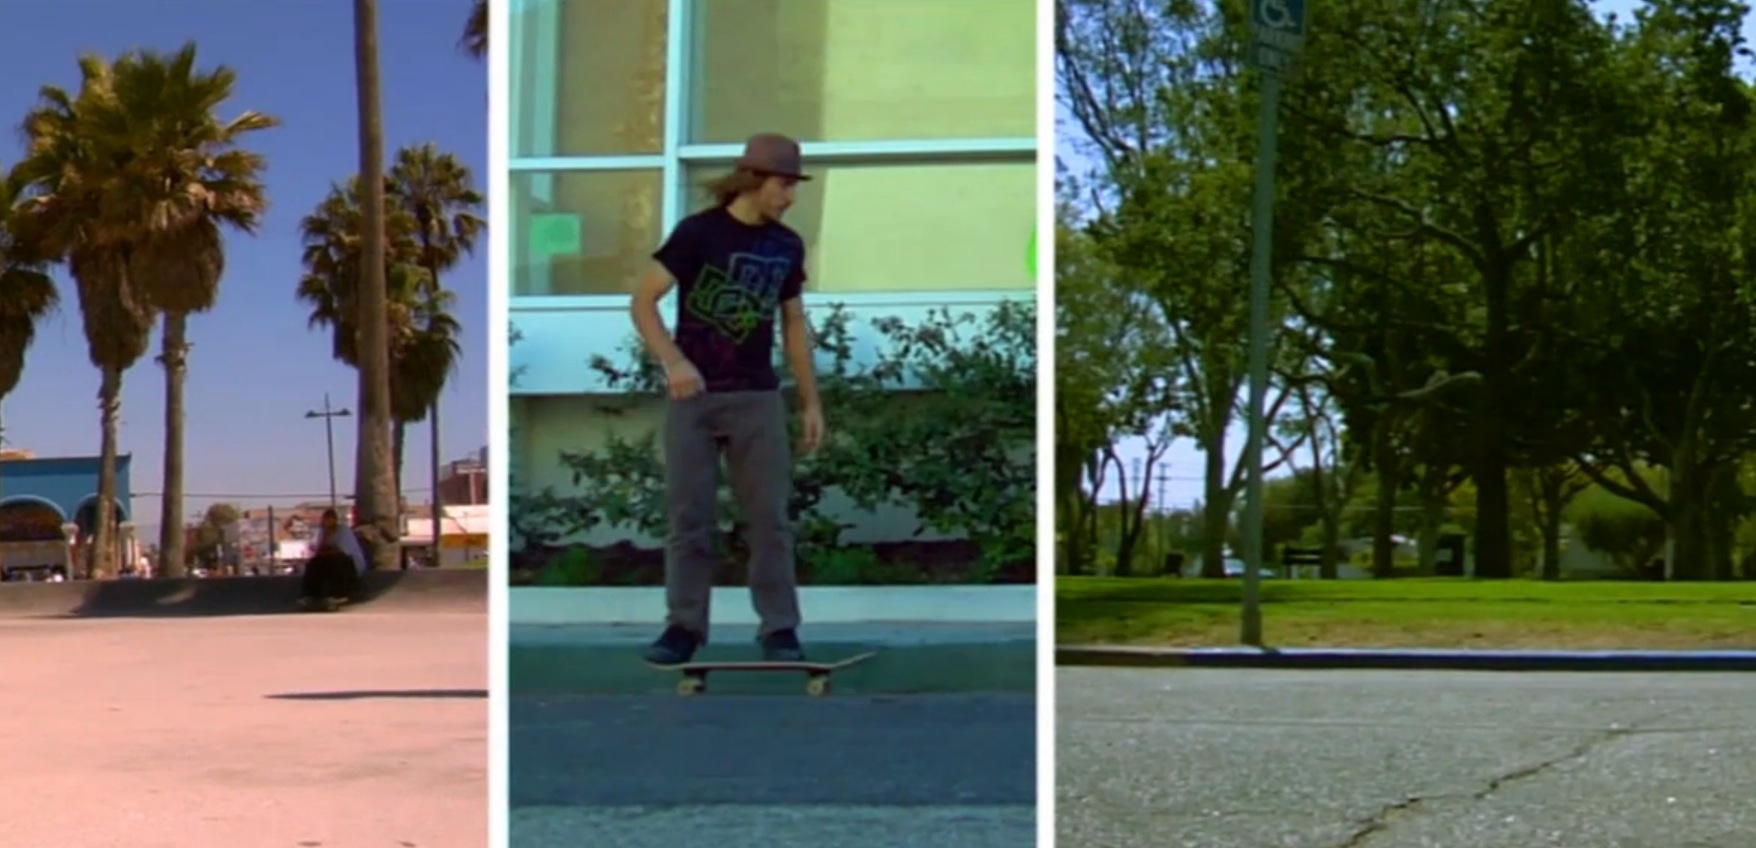 Out of Line Skate Film4